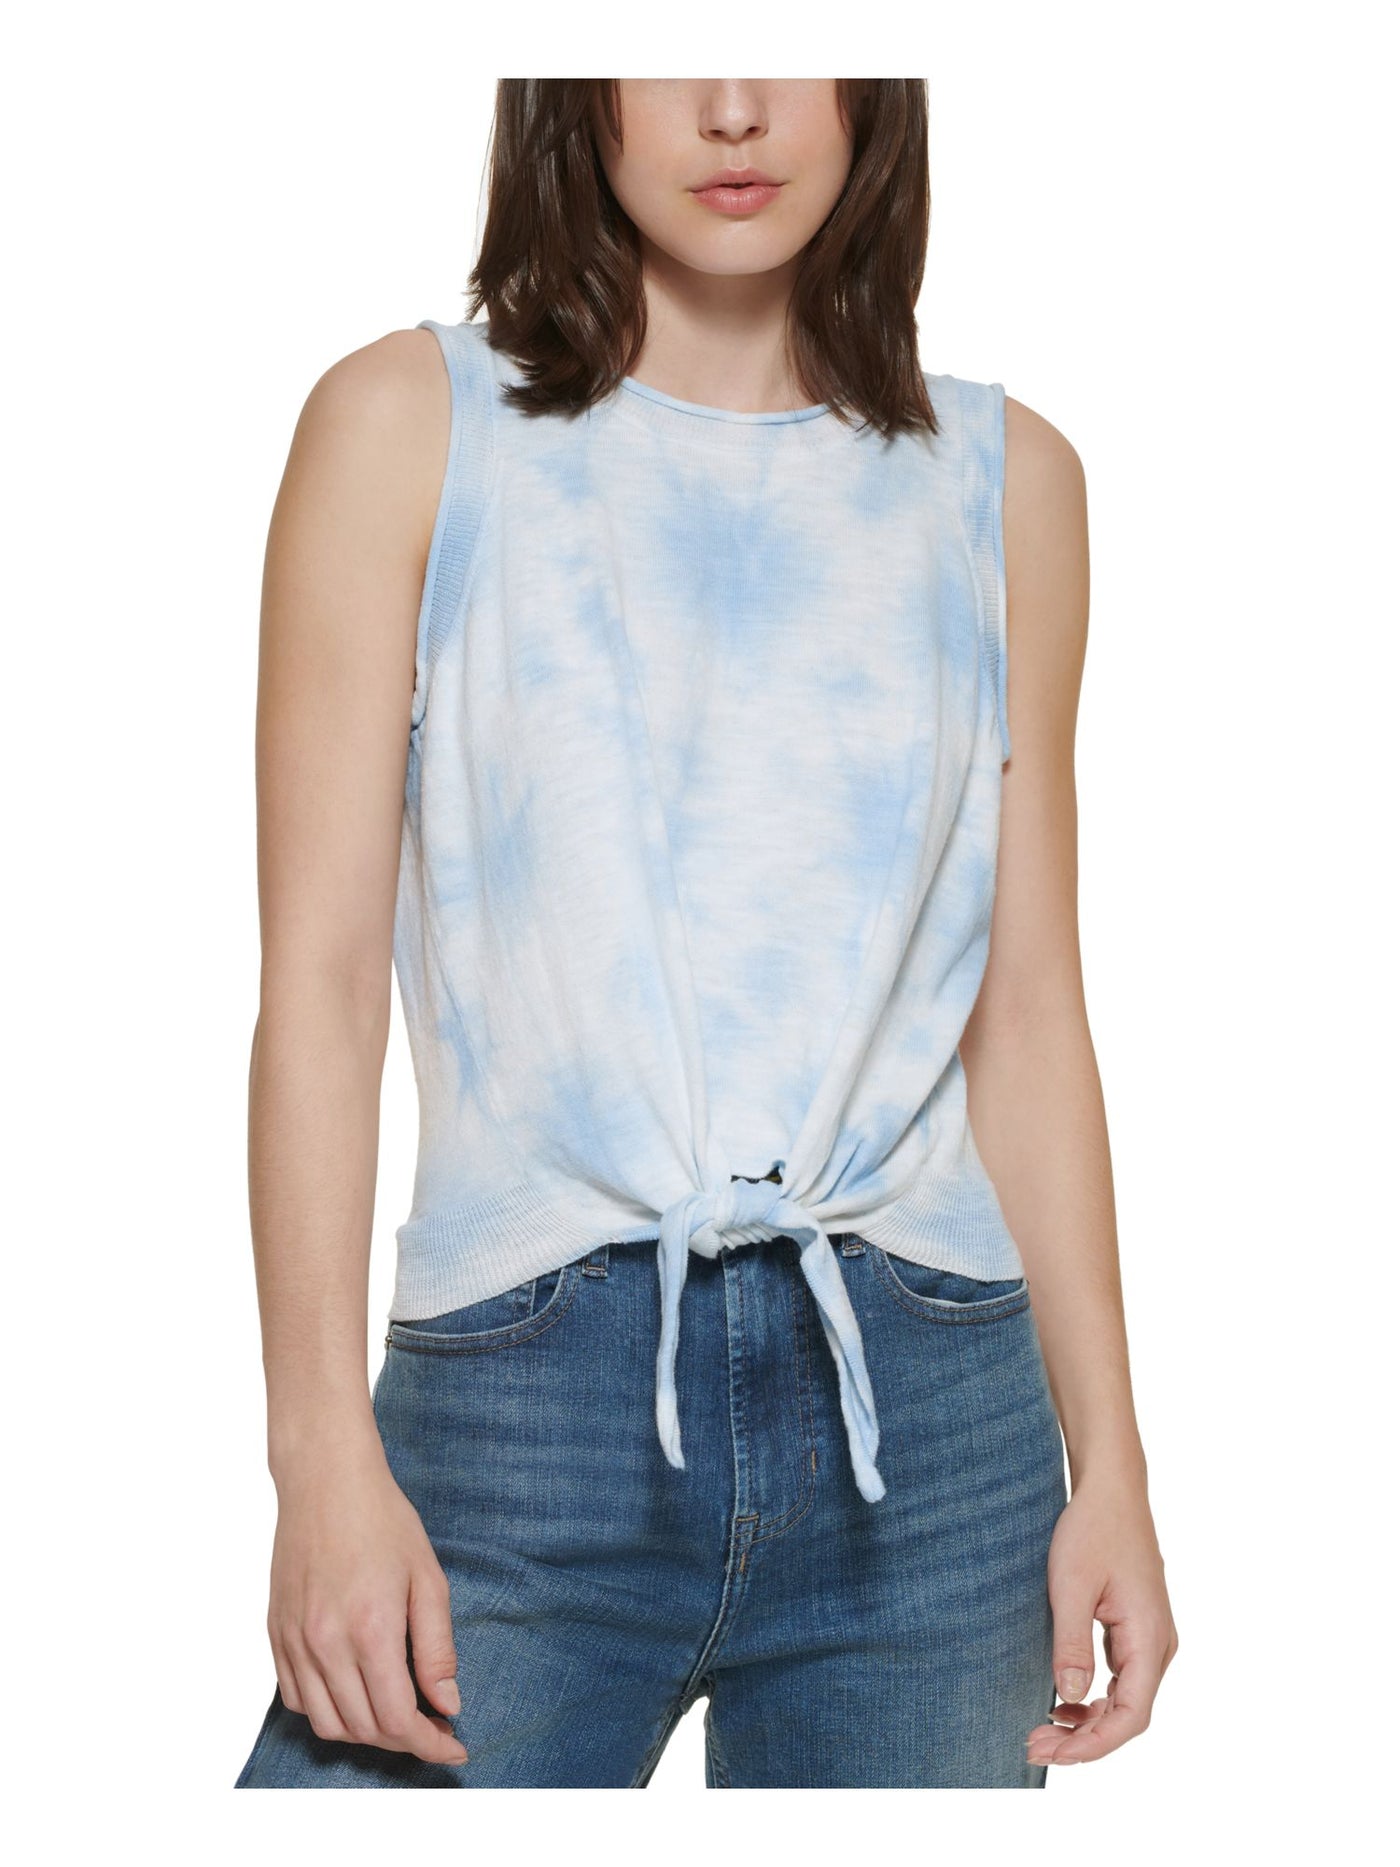 DKNY JEANS Womens Light Blue Ribbed Tie Front Pullover Tie Dye Sleeveless Crew Neck Tank Top XL